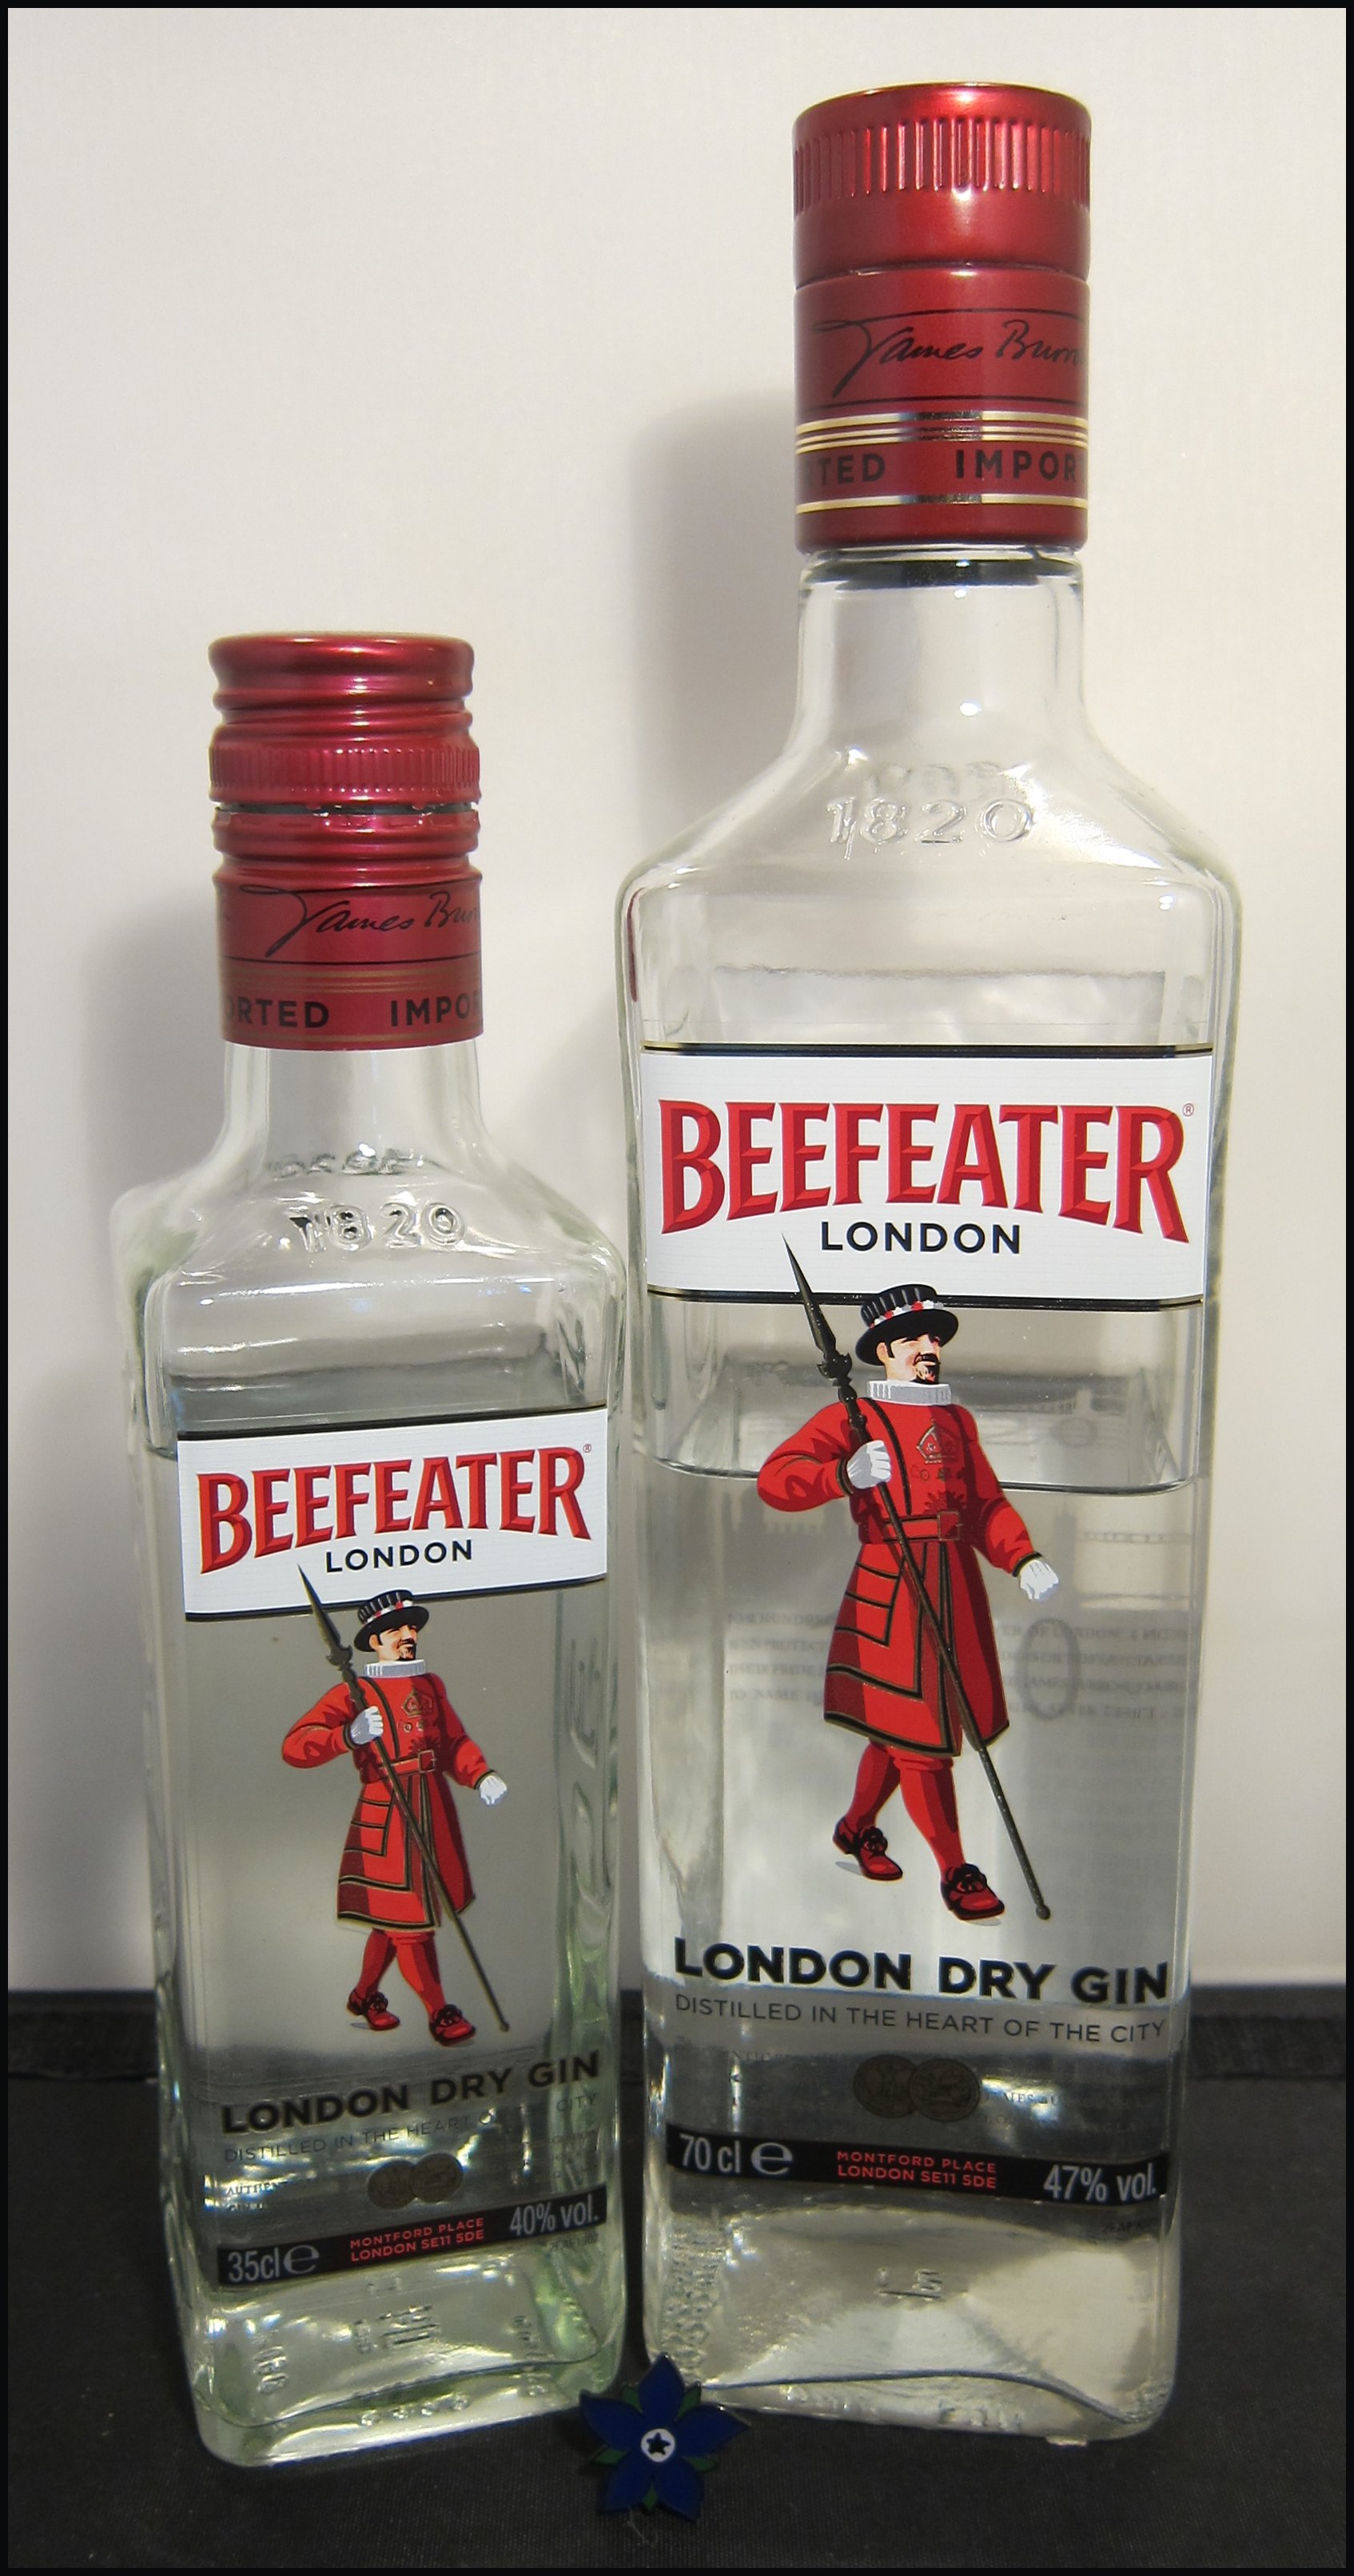 Beefeater with… Cocktails Bonus Cup | Gin Beefeater Gin! Garden Fruit – Summer With London